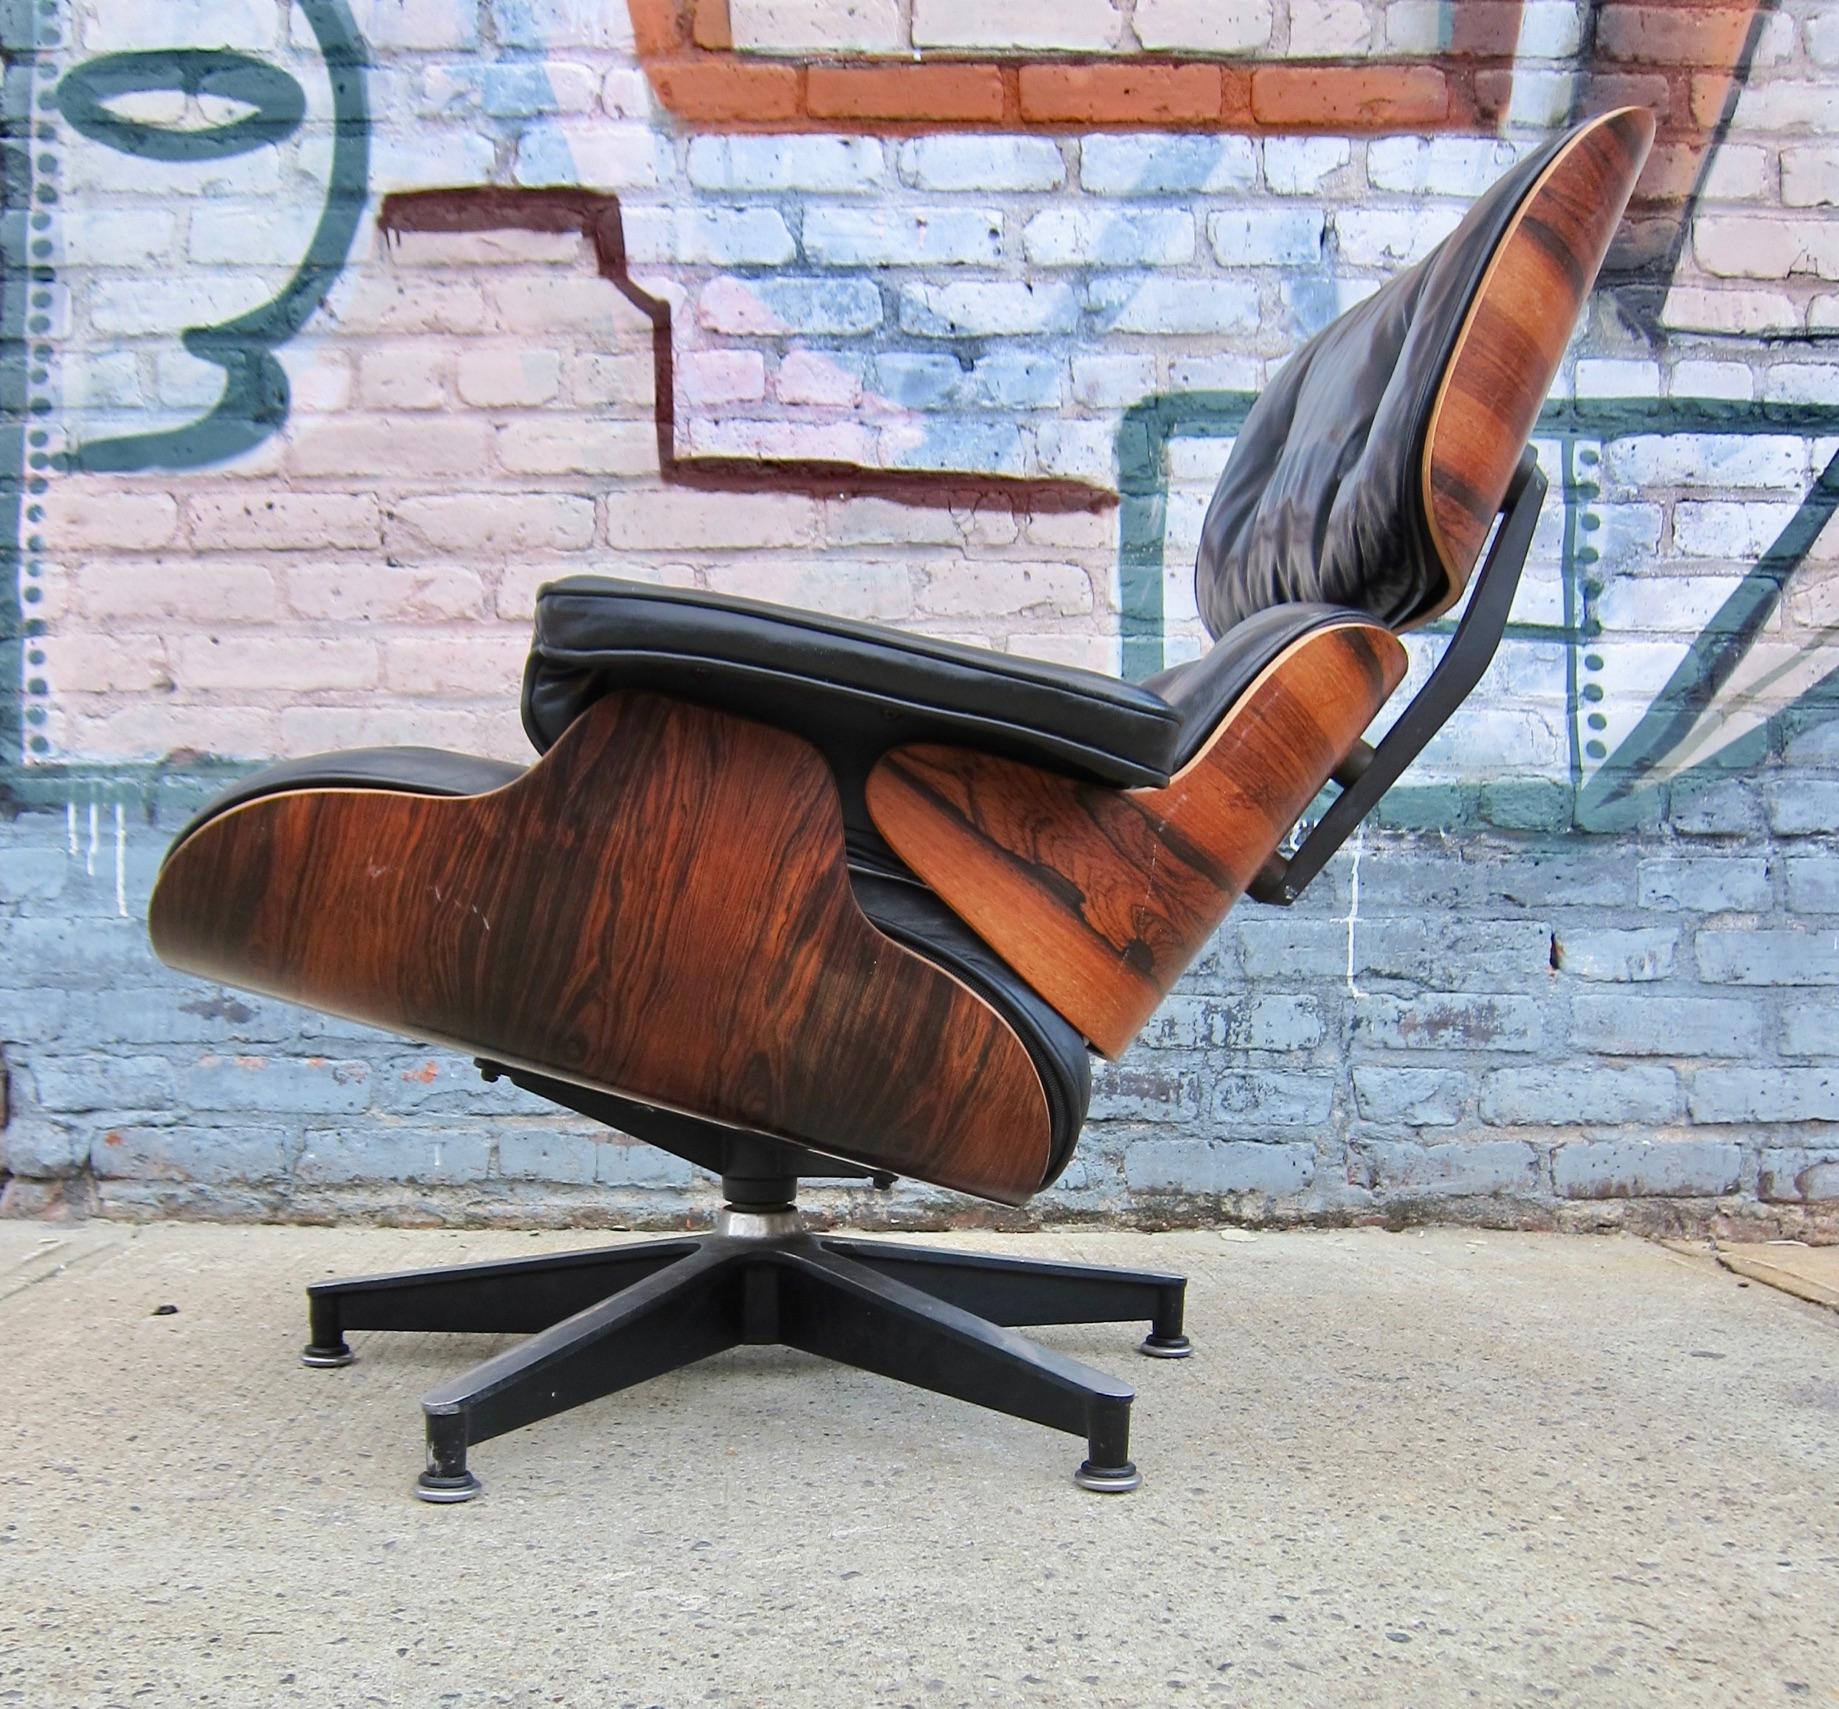 Fantastic Eames set. Chair and ottoman both in excellent condition with normal wear. Superb color and rare sap grain. Signed Herman Miller. Shipping quotes are for disassembled chair and ottoman.